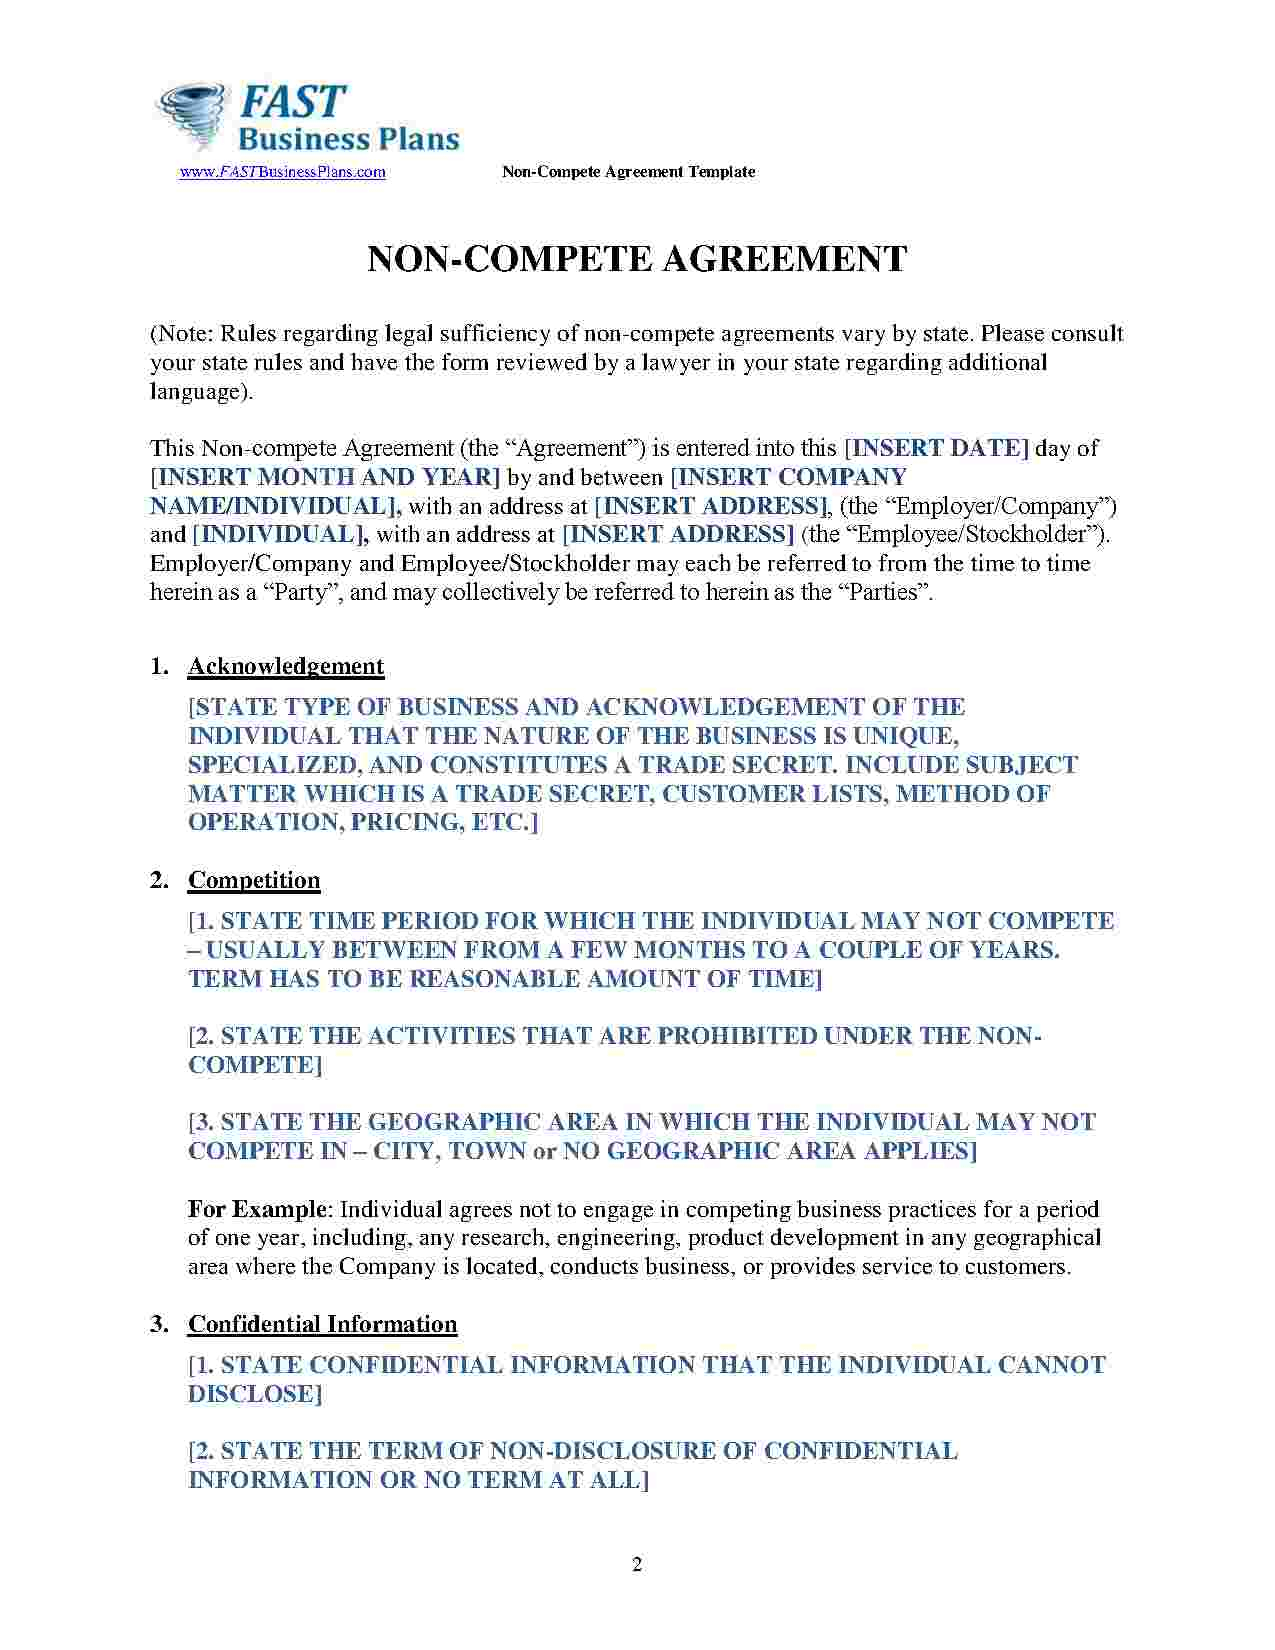 No Compete Agreement Download Non Compete Agreement Style 13 Template For Free At